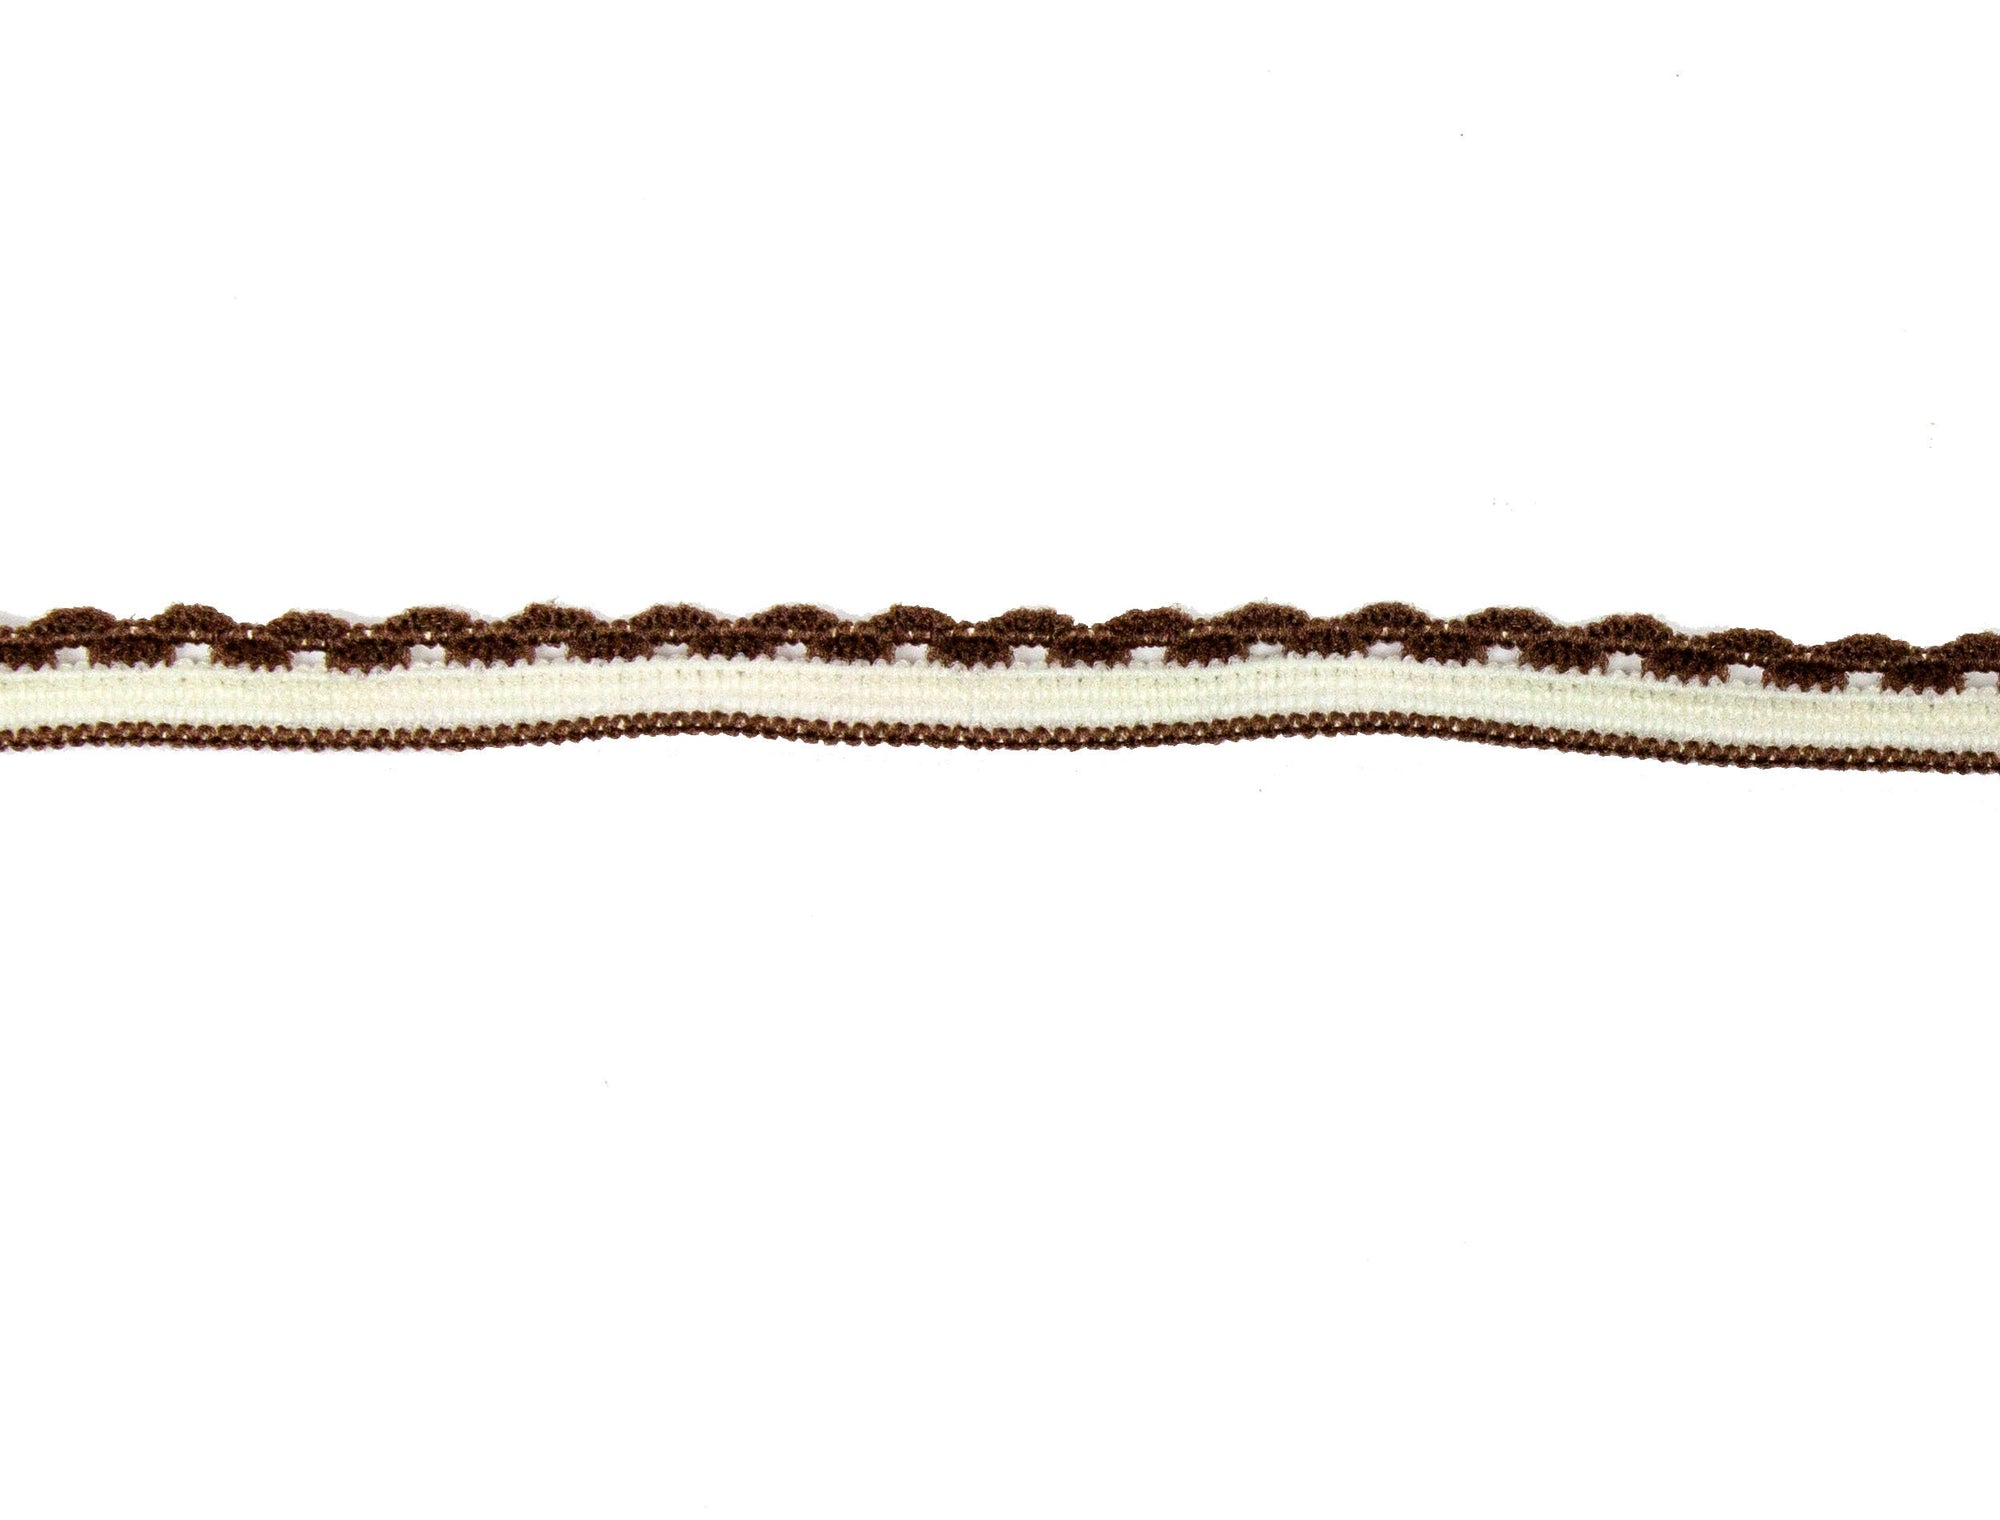 Vintage Trim White with Brown Edge Elastic 1/4" Wide - One Piece 2 1/2 Yards Long - Humboldt Haberdashery